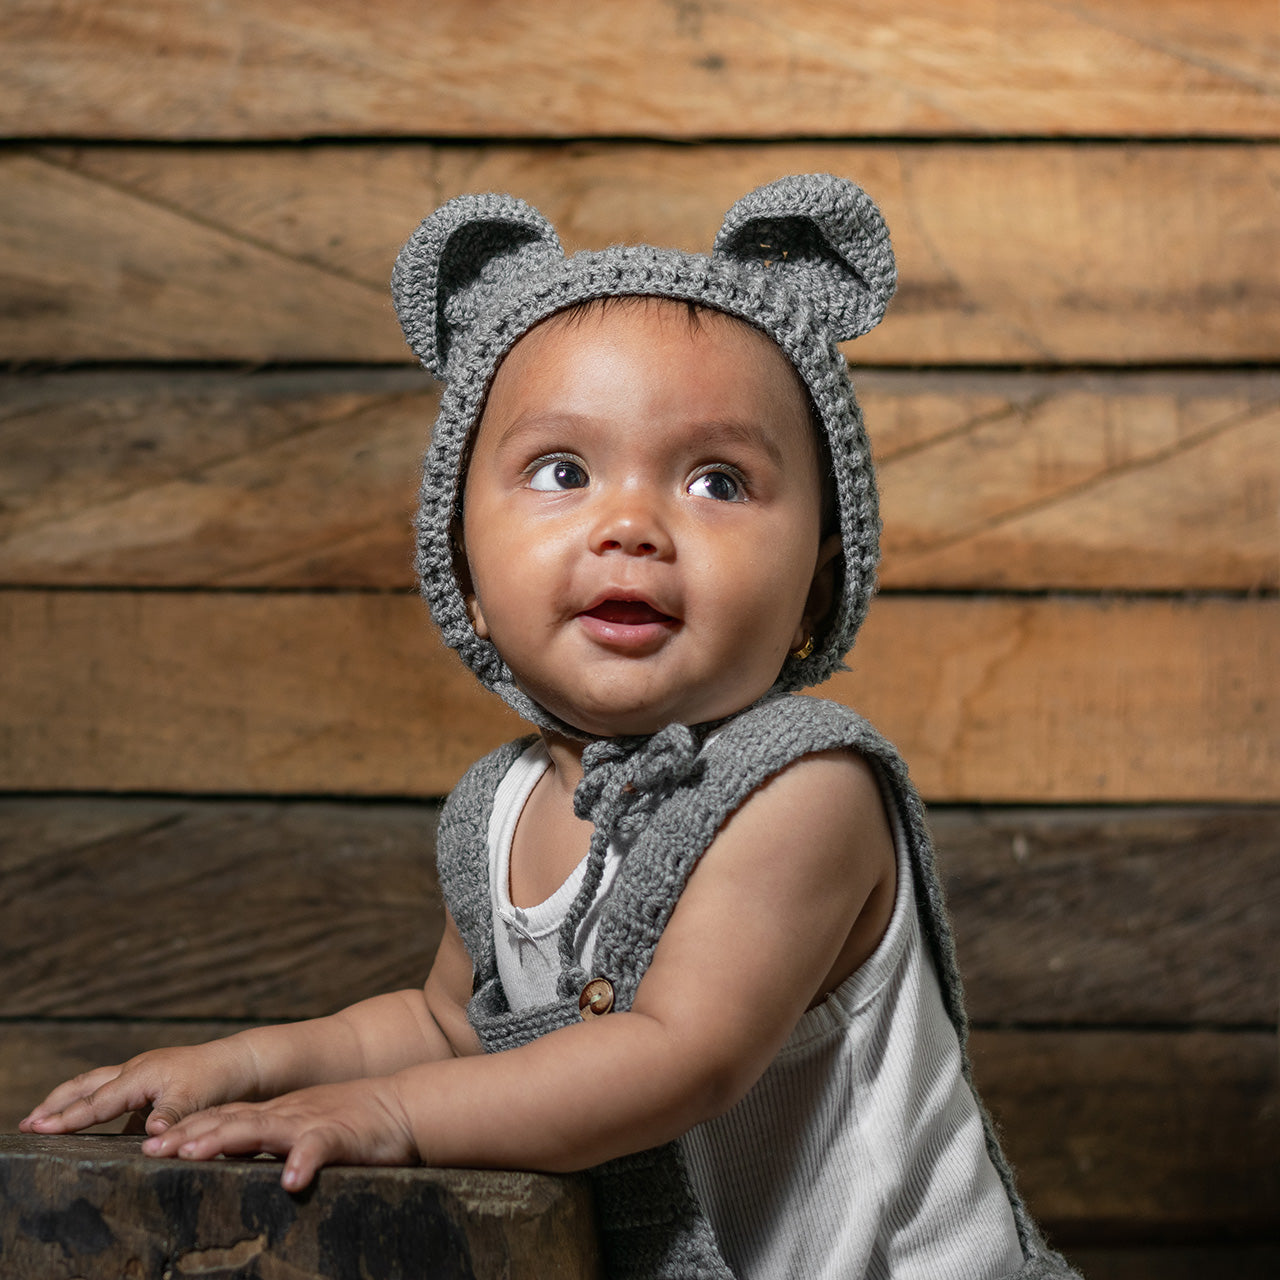 Baby with brown skin wearing overalls and a cap